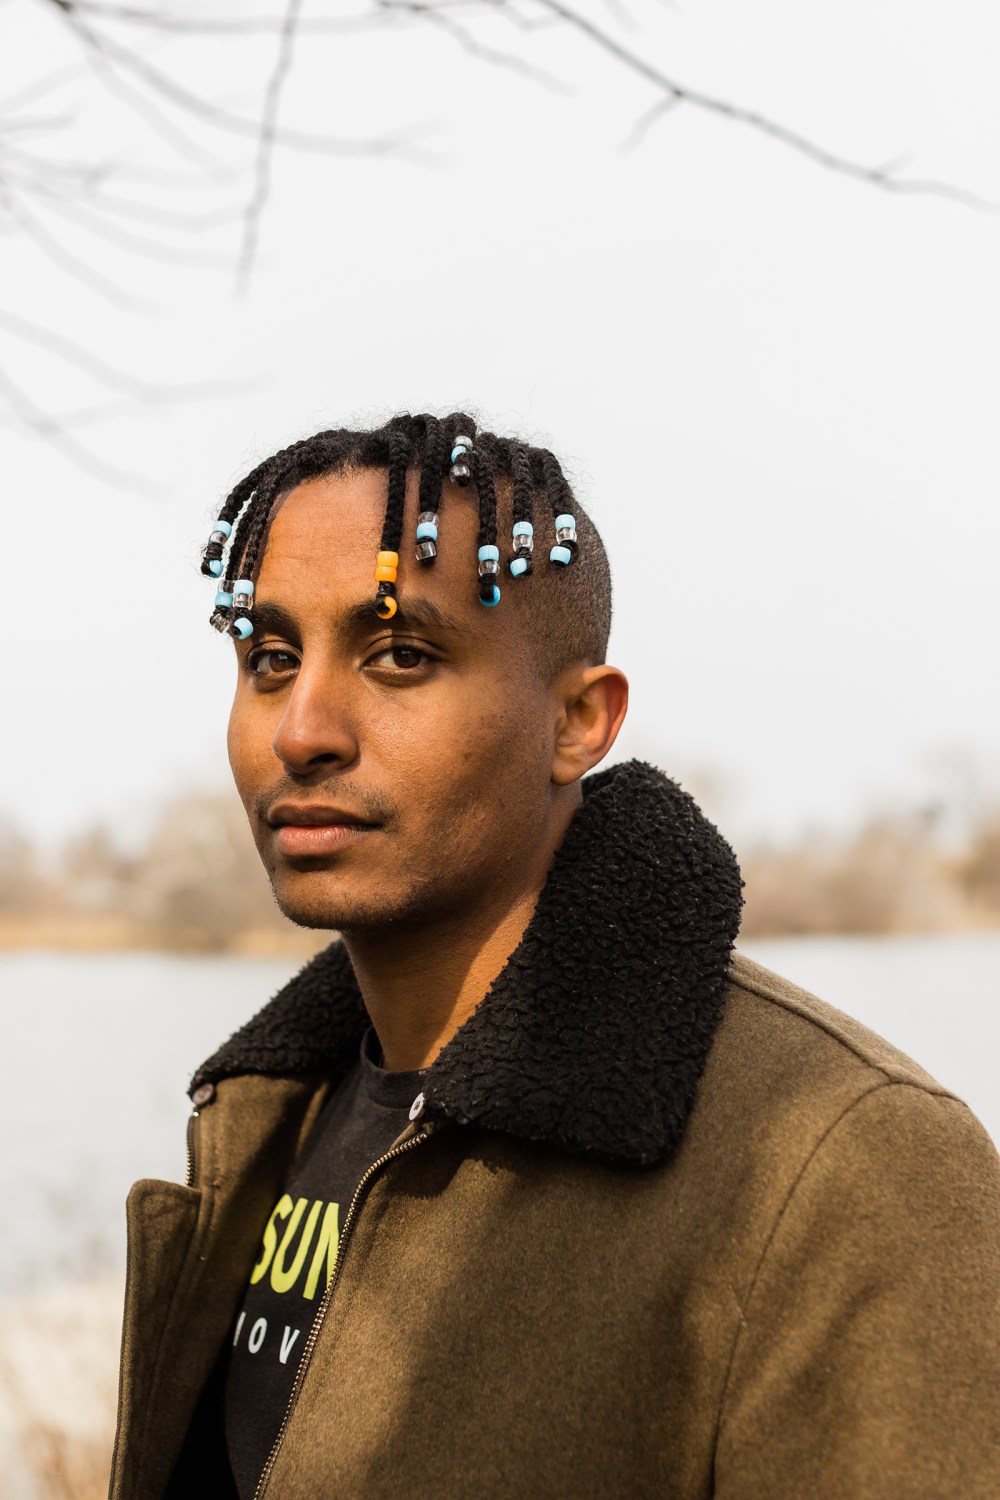 Kidus Girma for Time Magazine by Anjali Pinto. Photographed in Humboldt Park, Chicago on March 10, 2022.